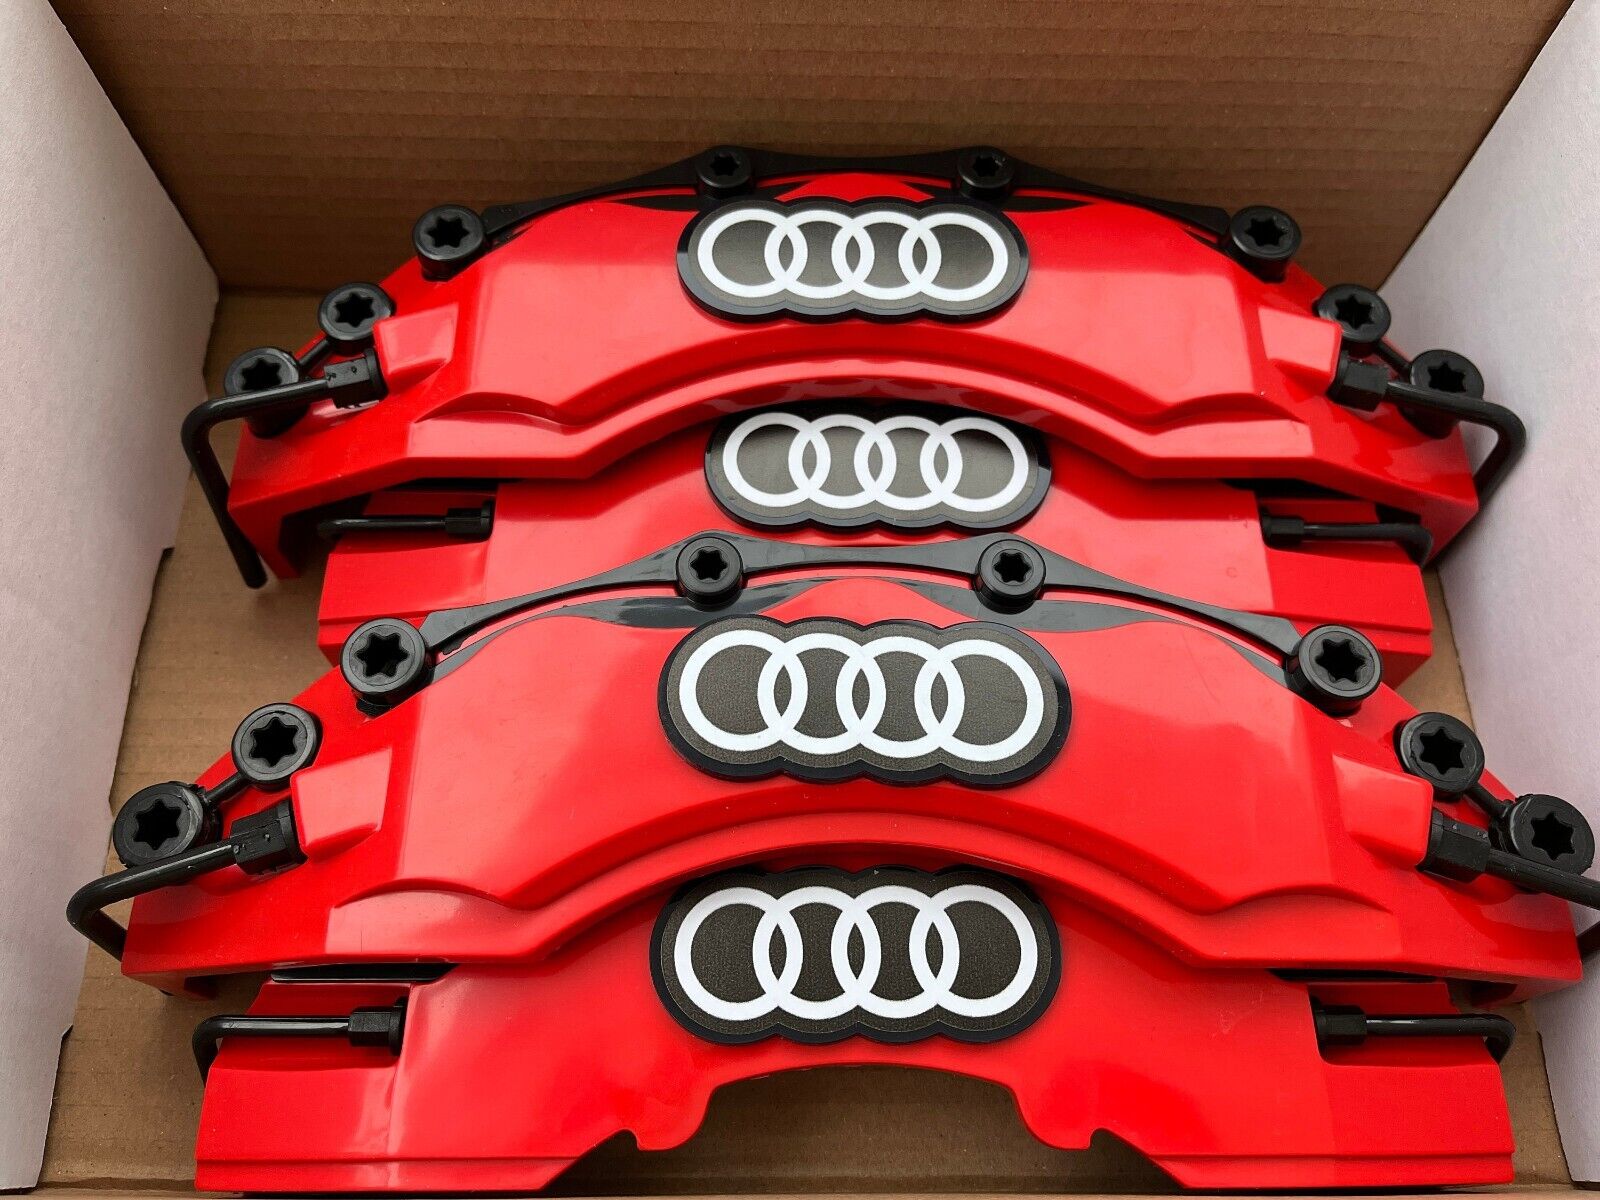 4 Pieces Audi Red Brake Caliper Covers 4PCS Size 16' and up Rims Universal